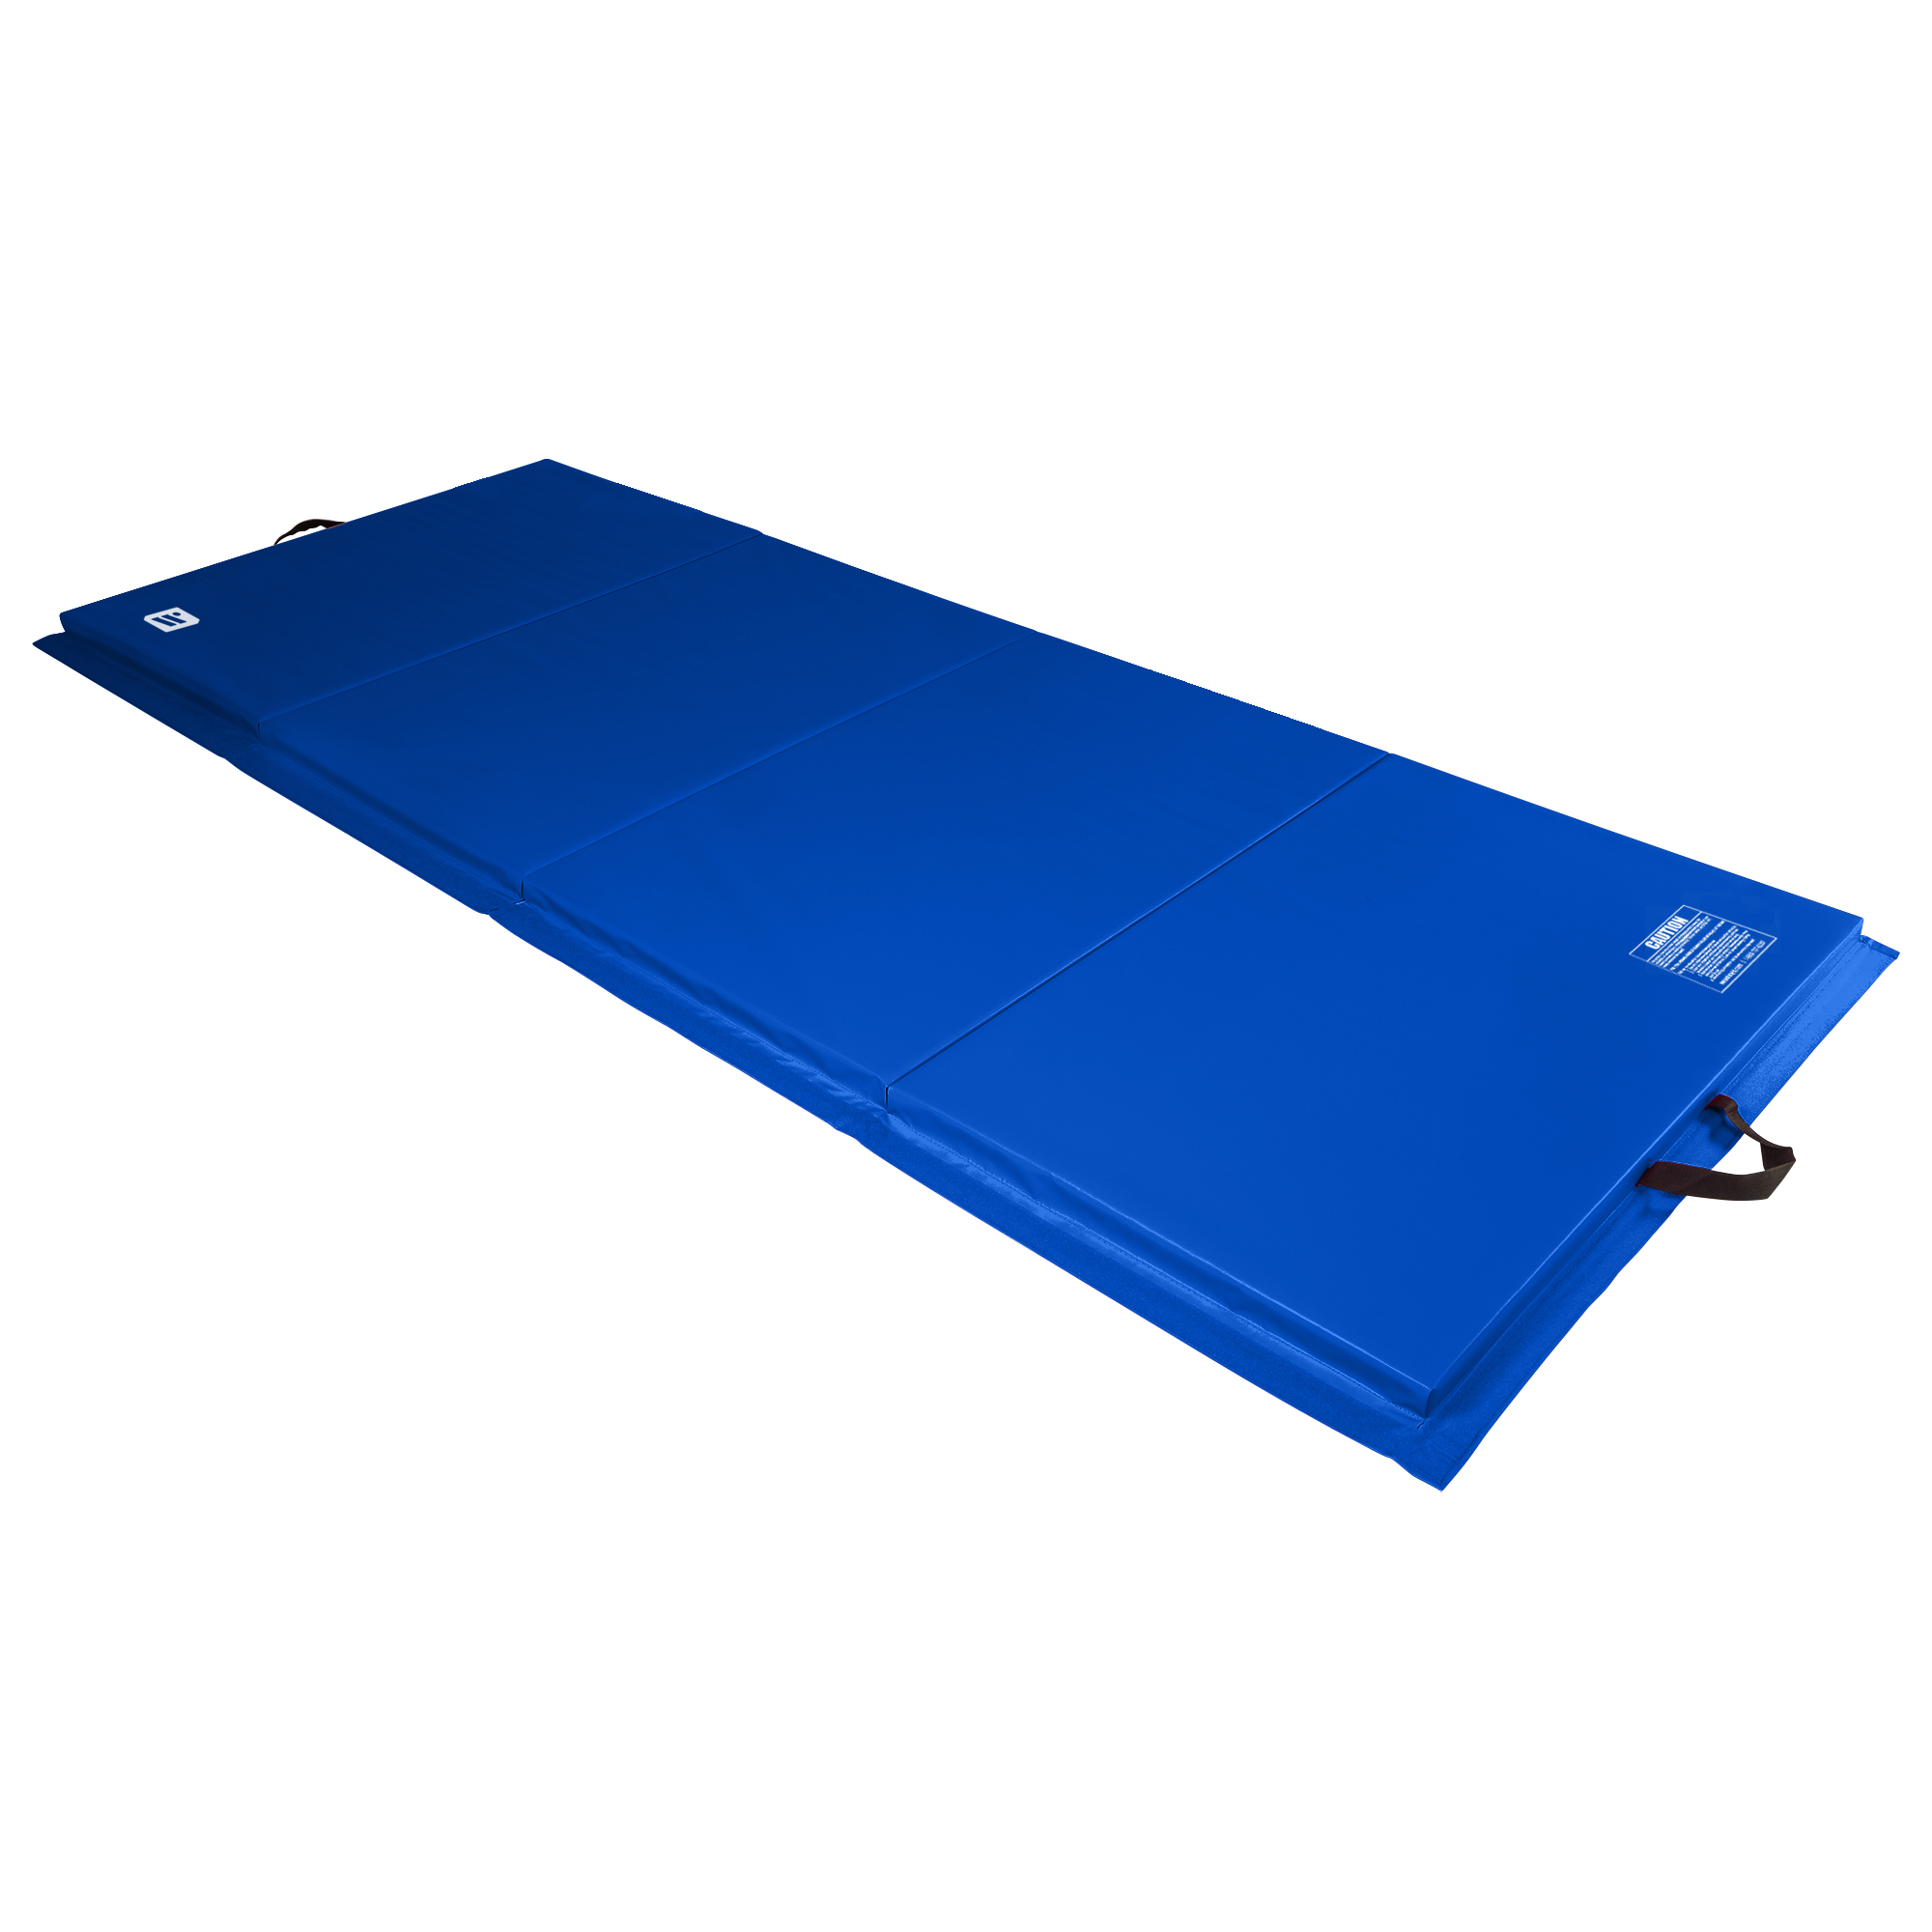 We Sell Mats 4 ft x 10 ft x 2 in Personal Fitness & Exercise Mat, Lightweight and Folds for Carrying - image 1 of 9